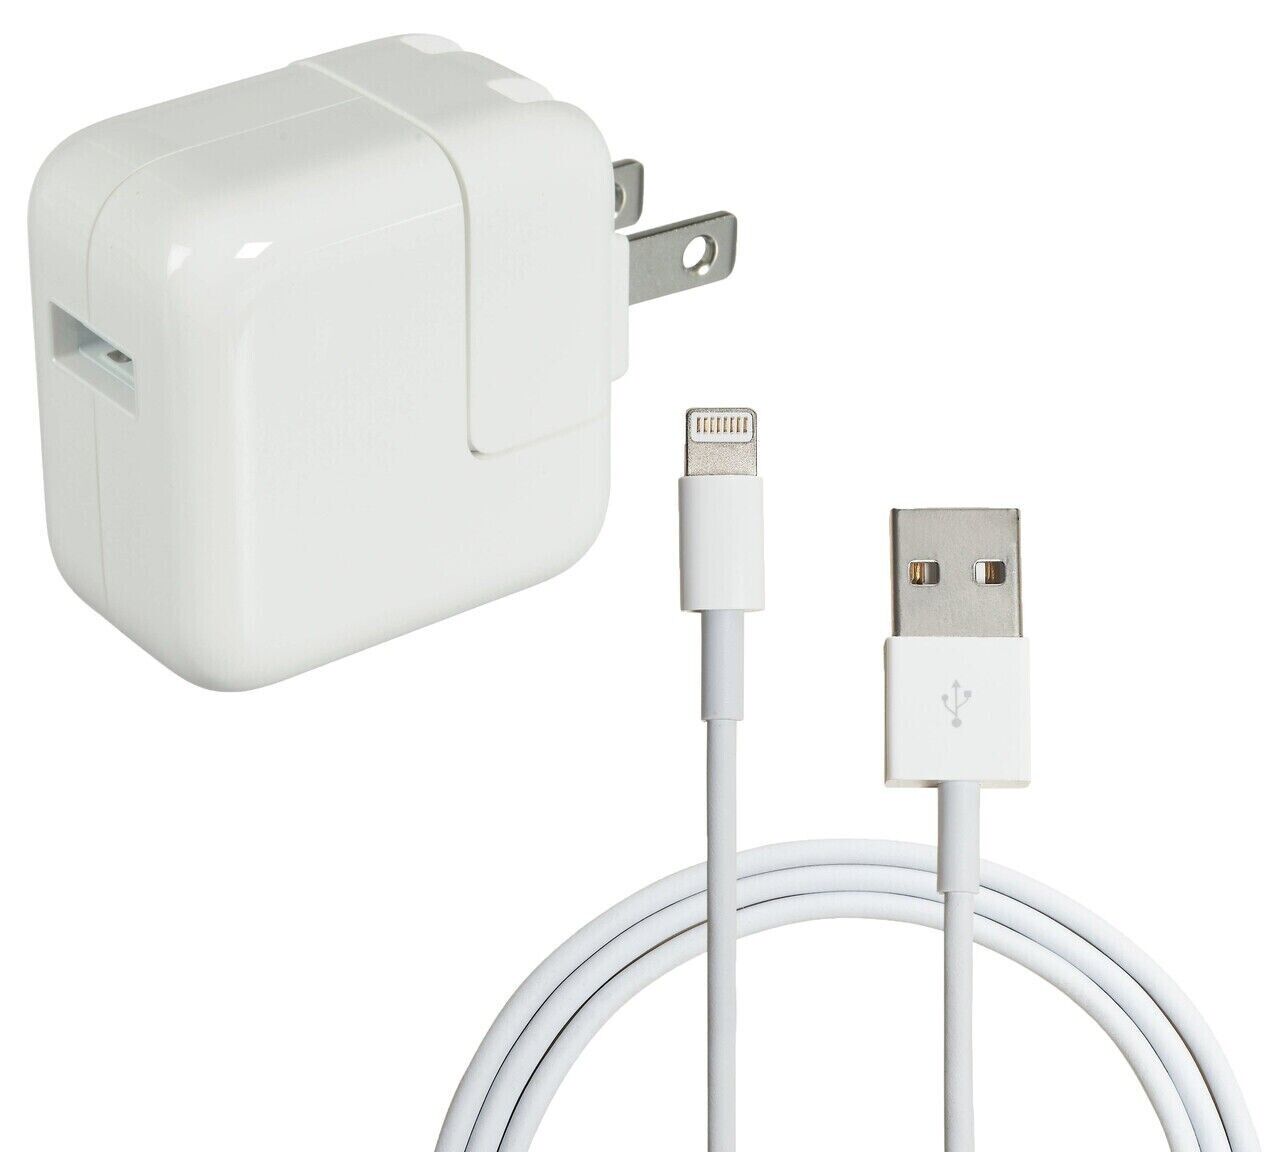 Original Apple 12W Wall Charger And 1M Lightning to USB Cable iPad's & iPhones's